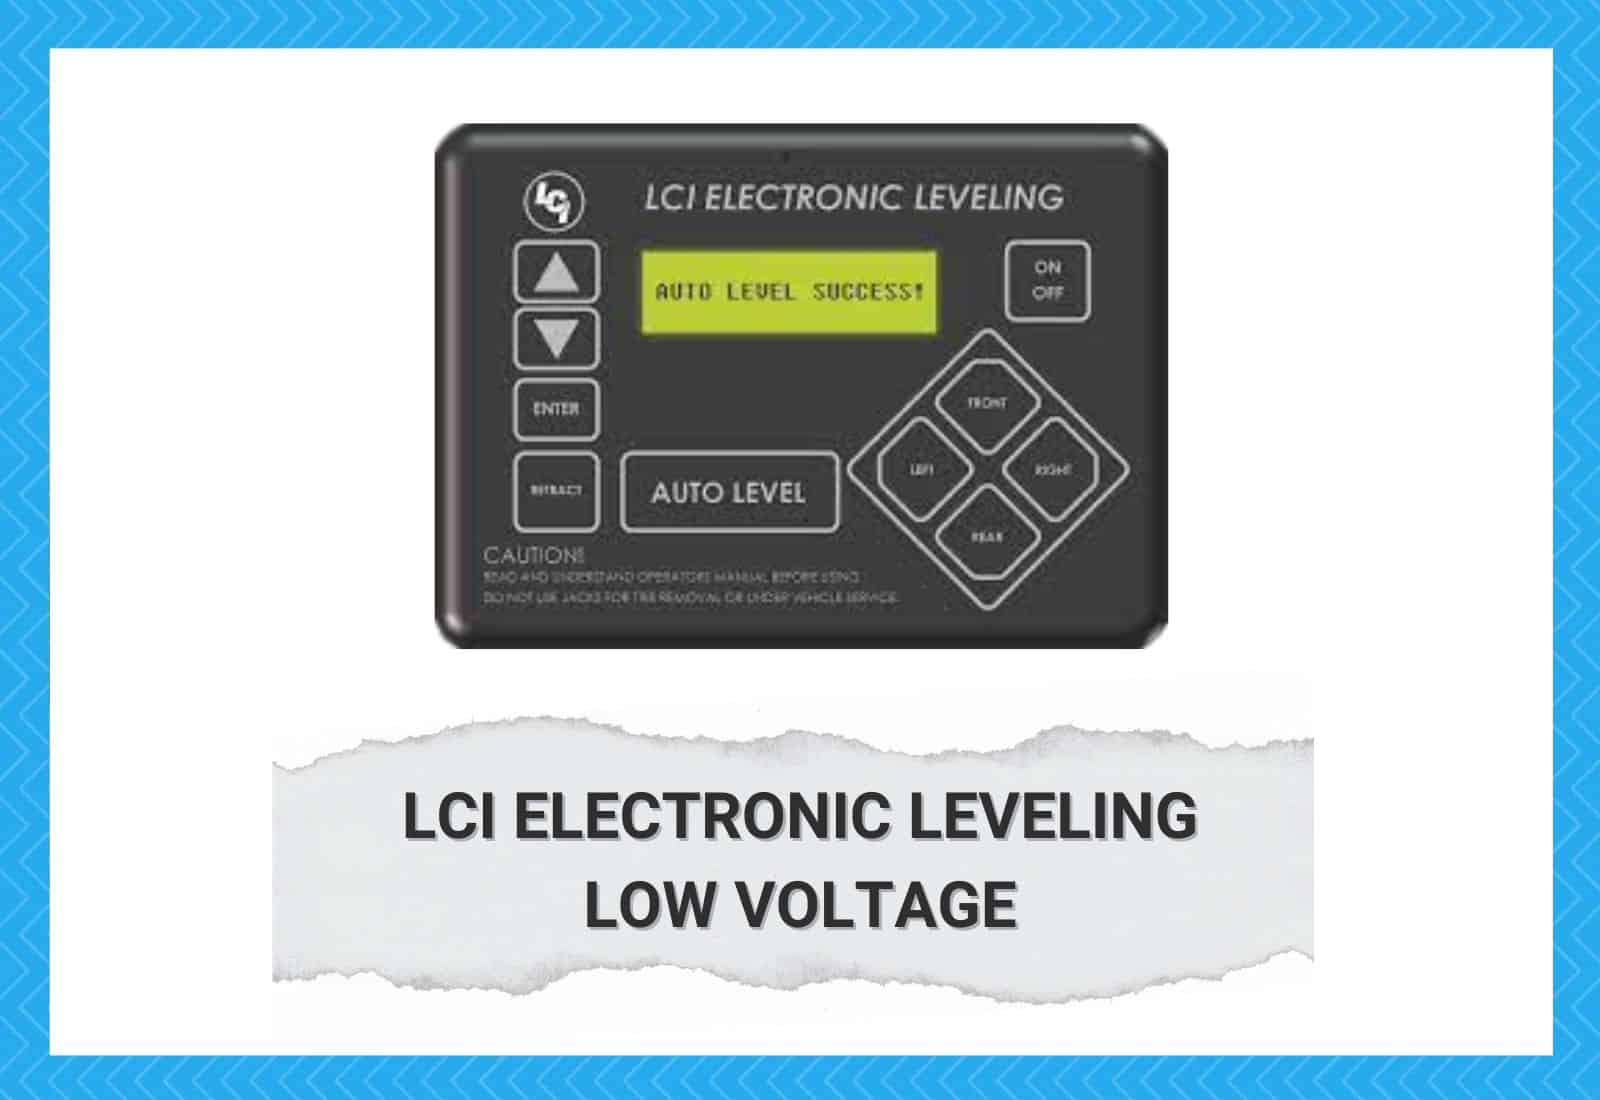 LCI Electronic Leveling Low Voltage